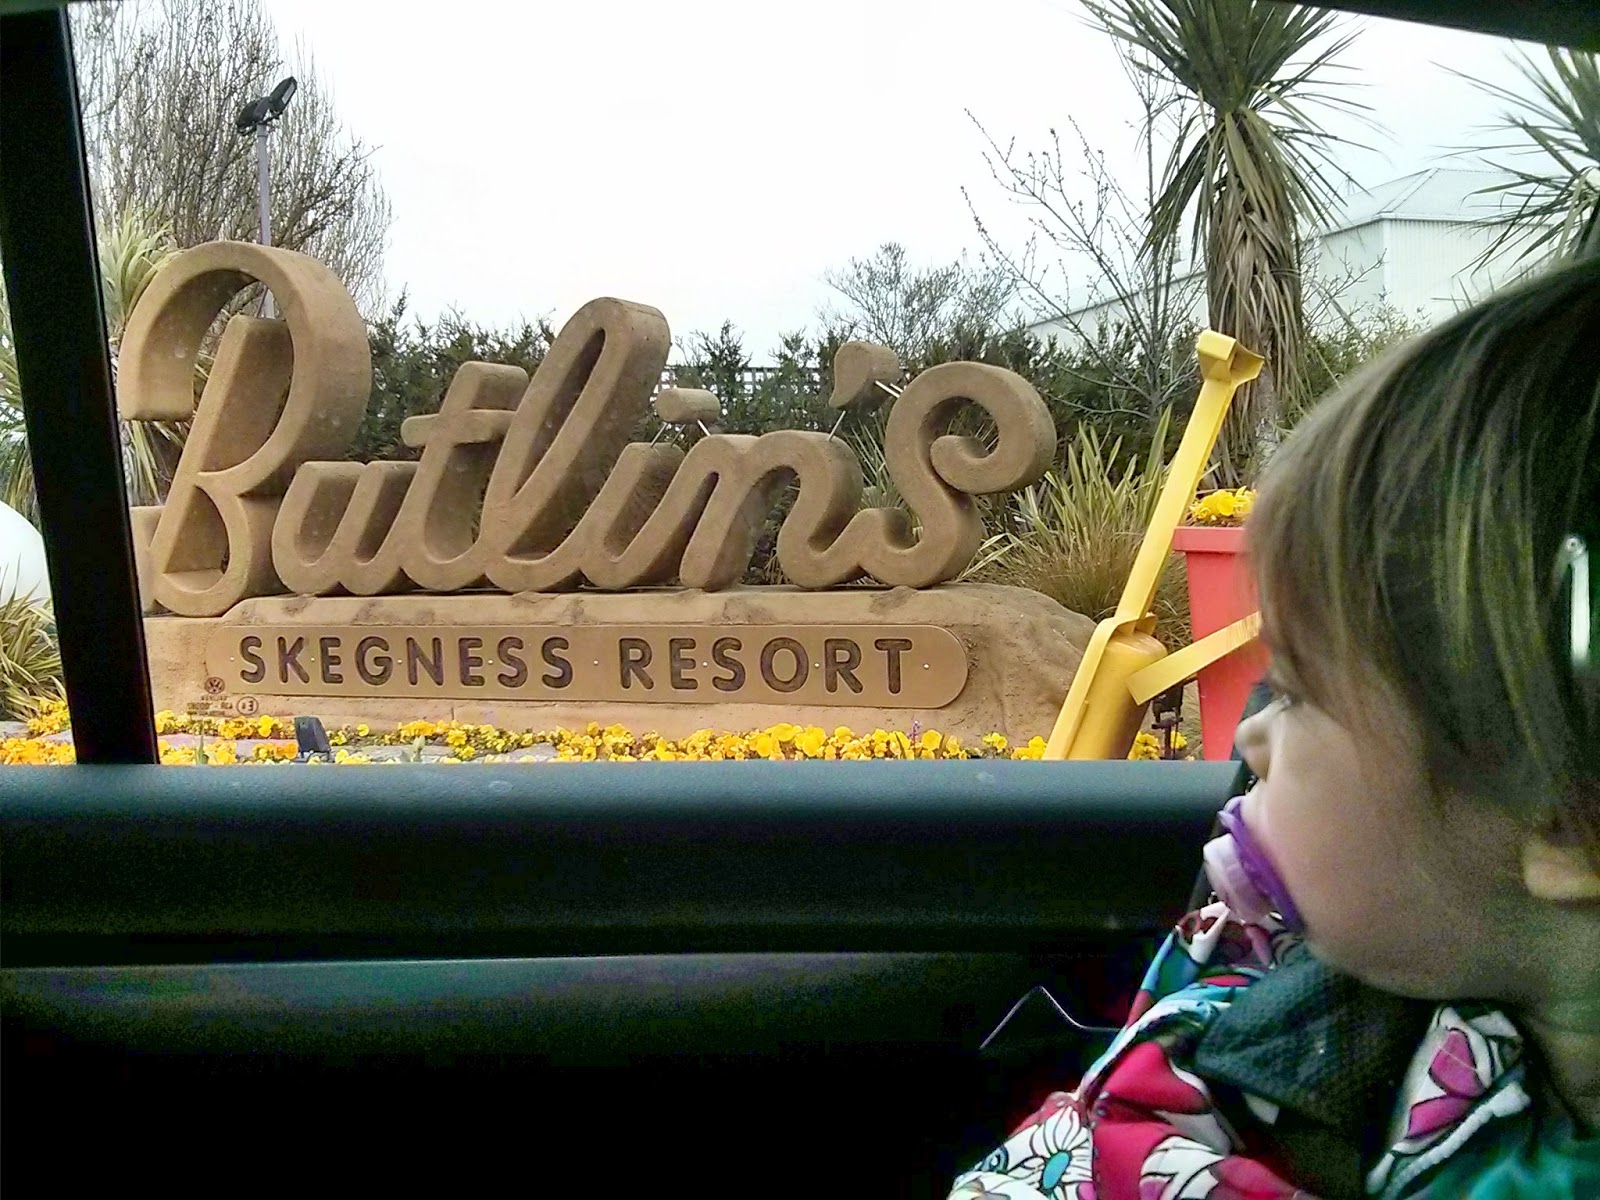 Entry to Butlin's